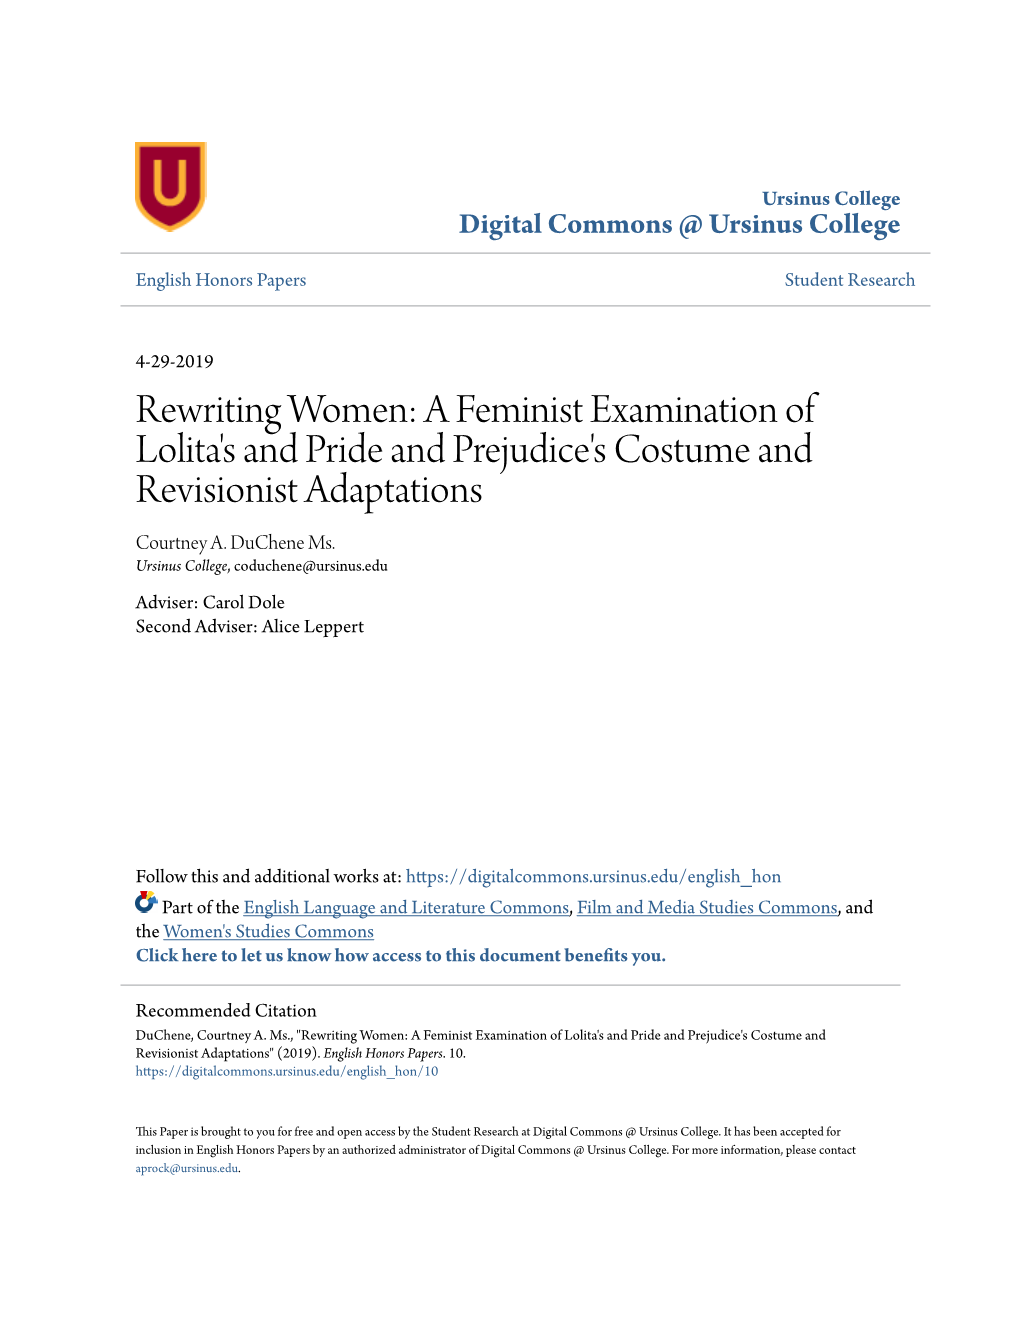 Rewriting Women: a Feminist Examination of Lolita's and Pride and Prejudice's Costume and Revisionist Adaptations Courtney A